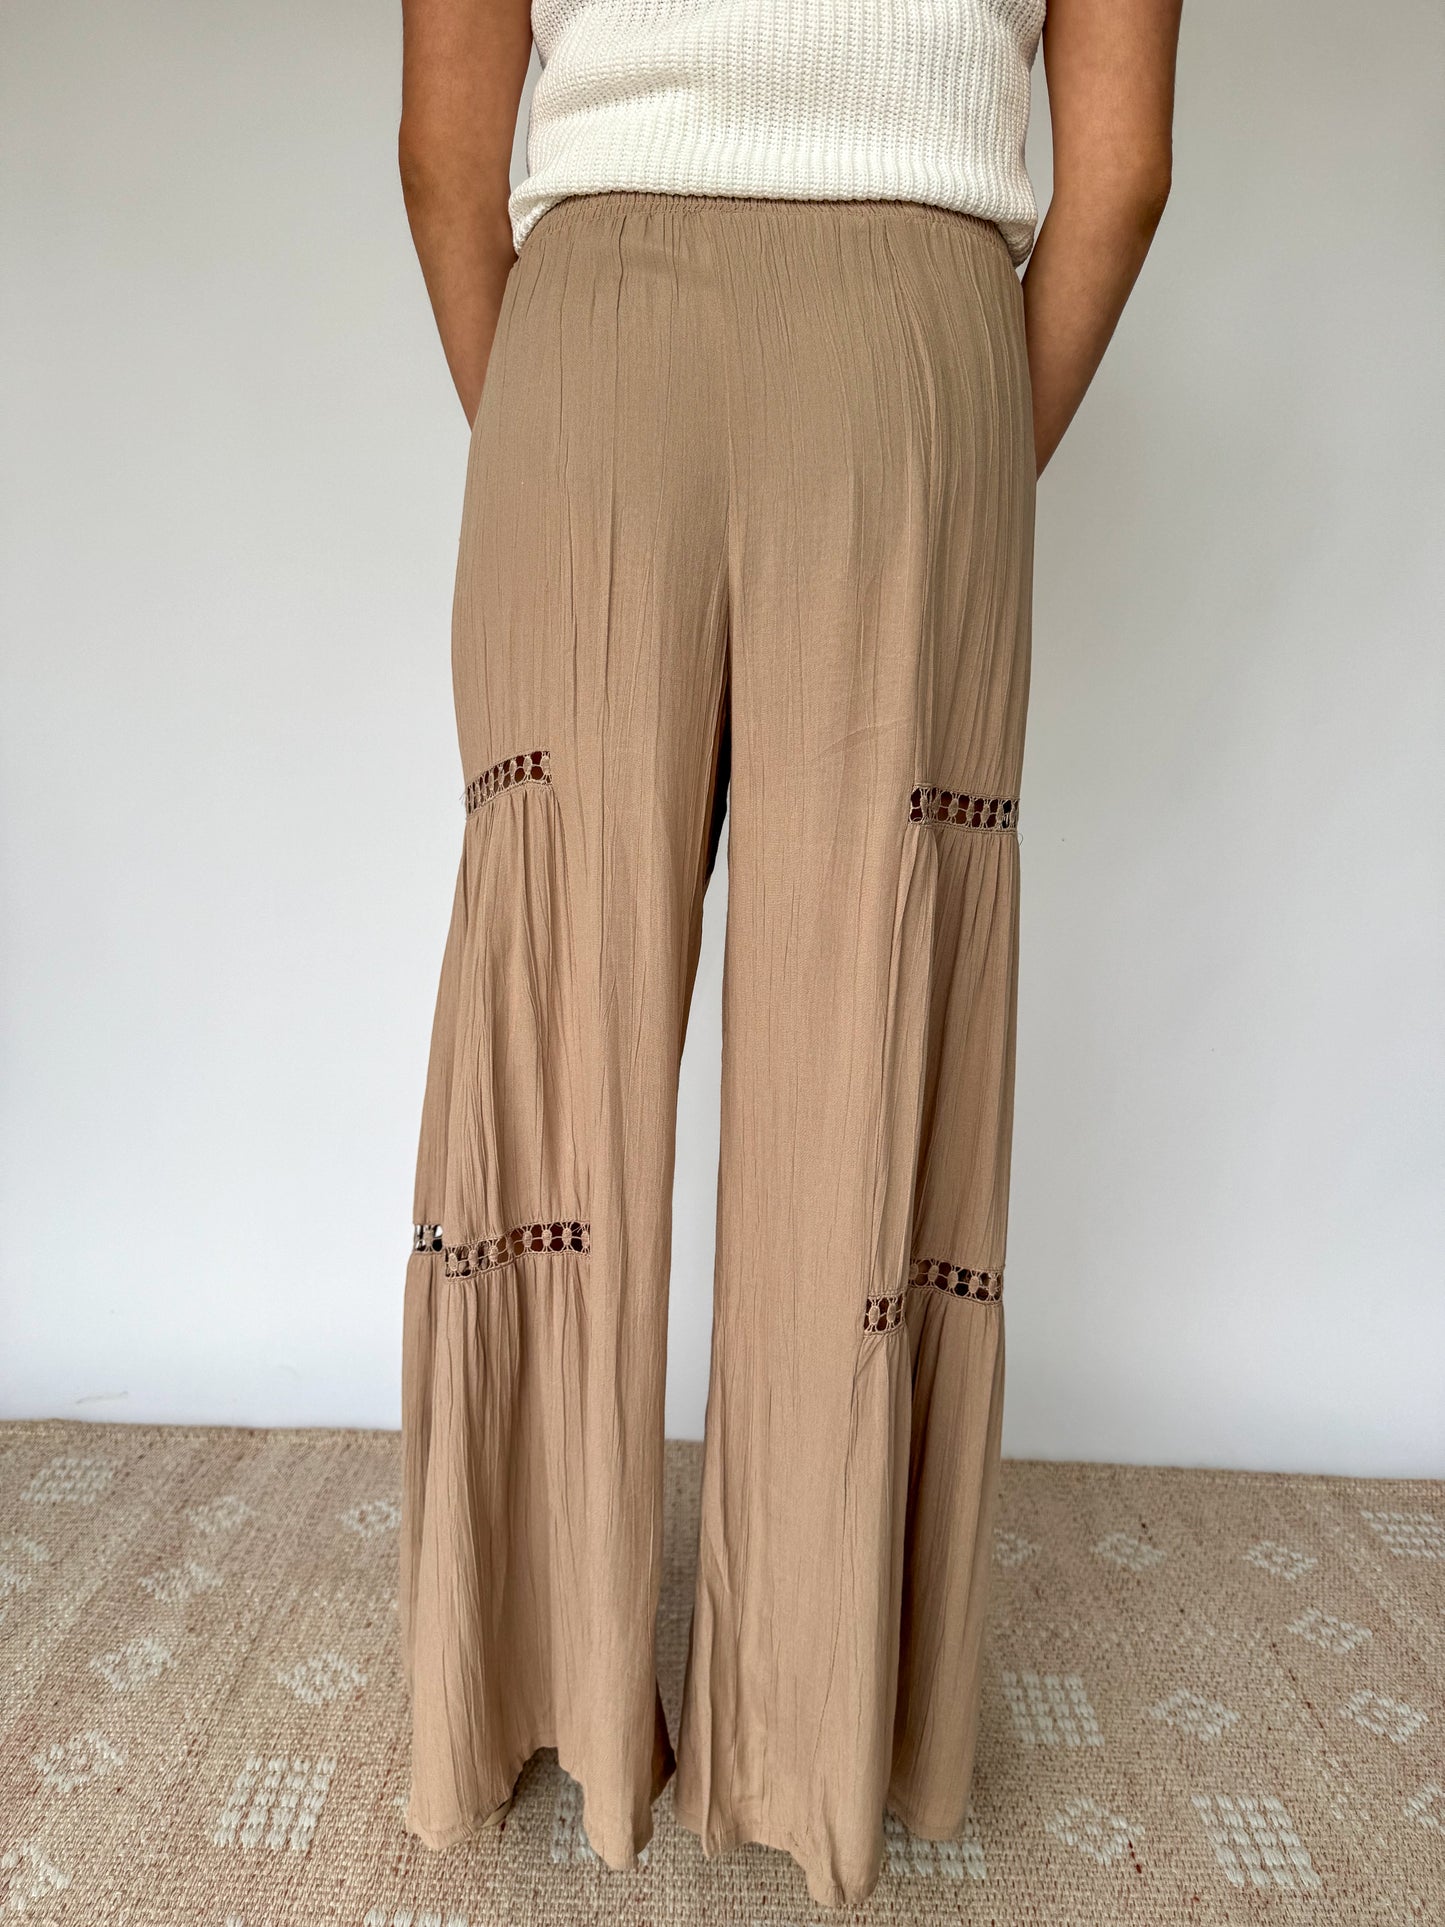 Out For The Day Tan Lace Detail Pants